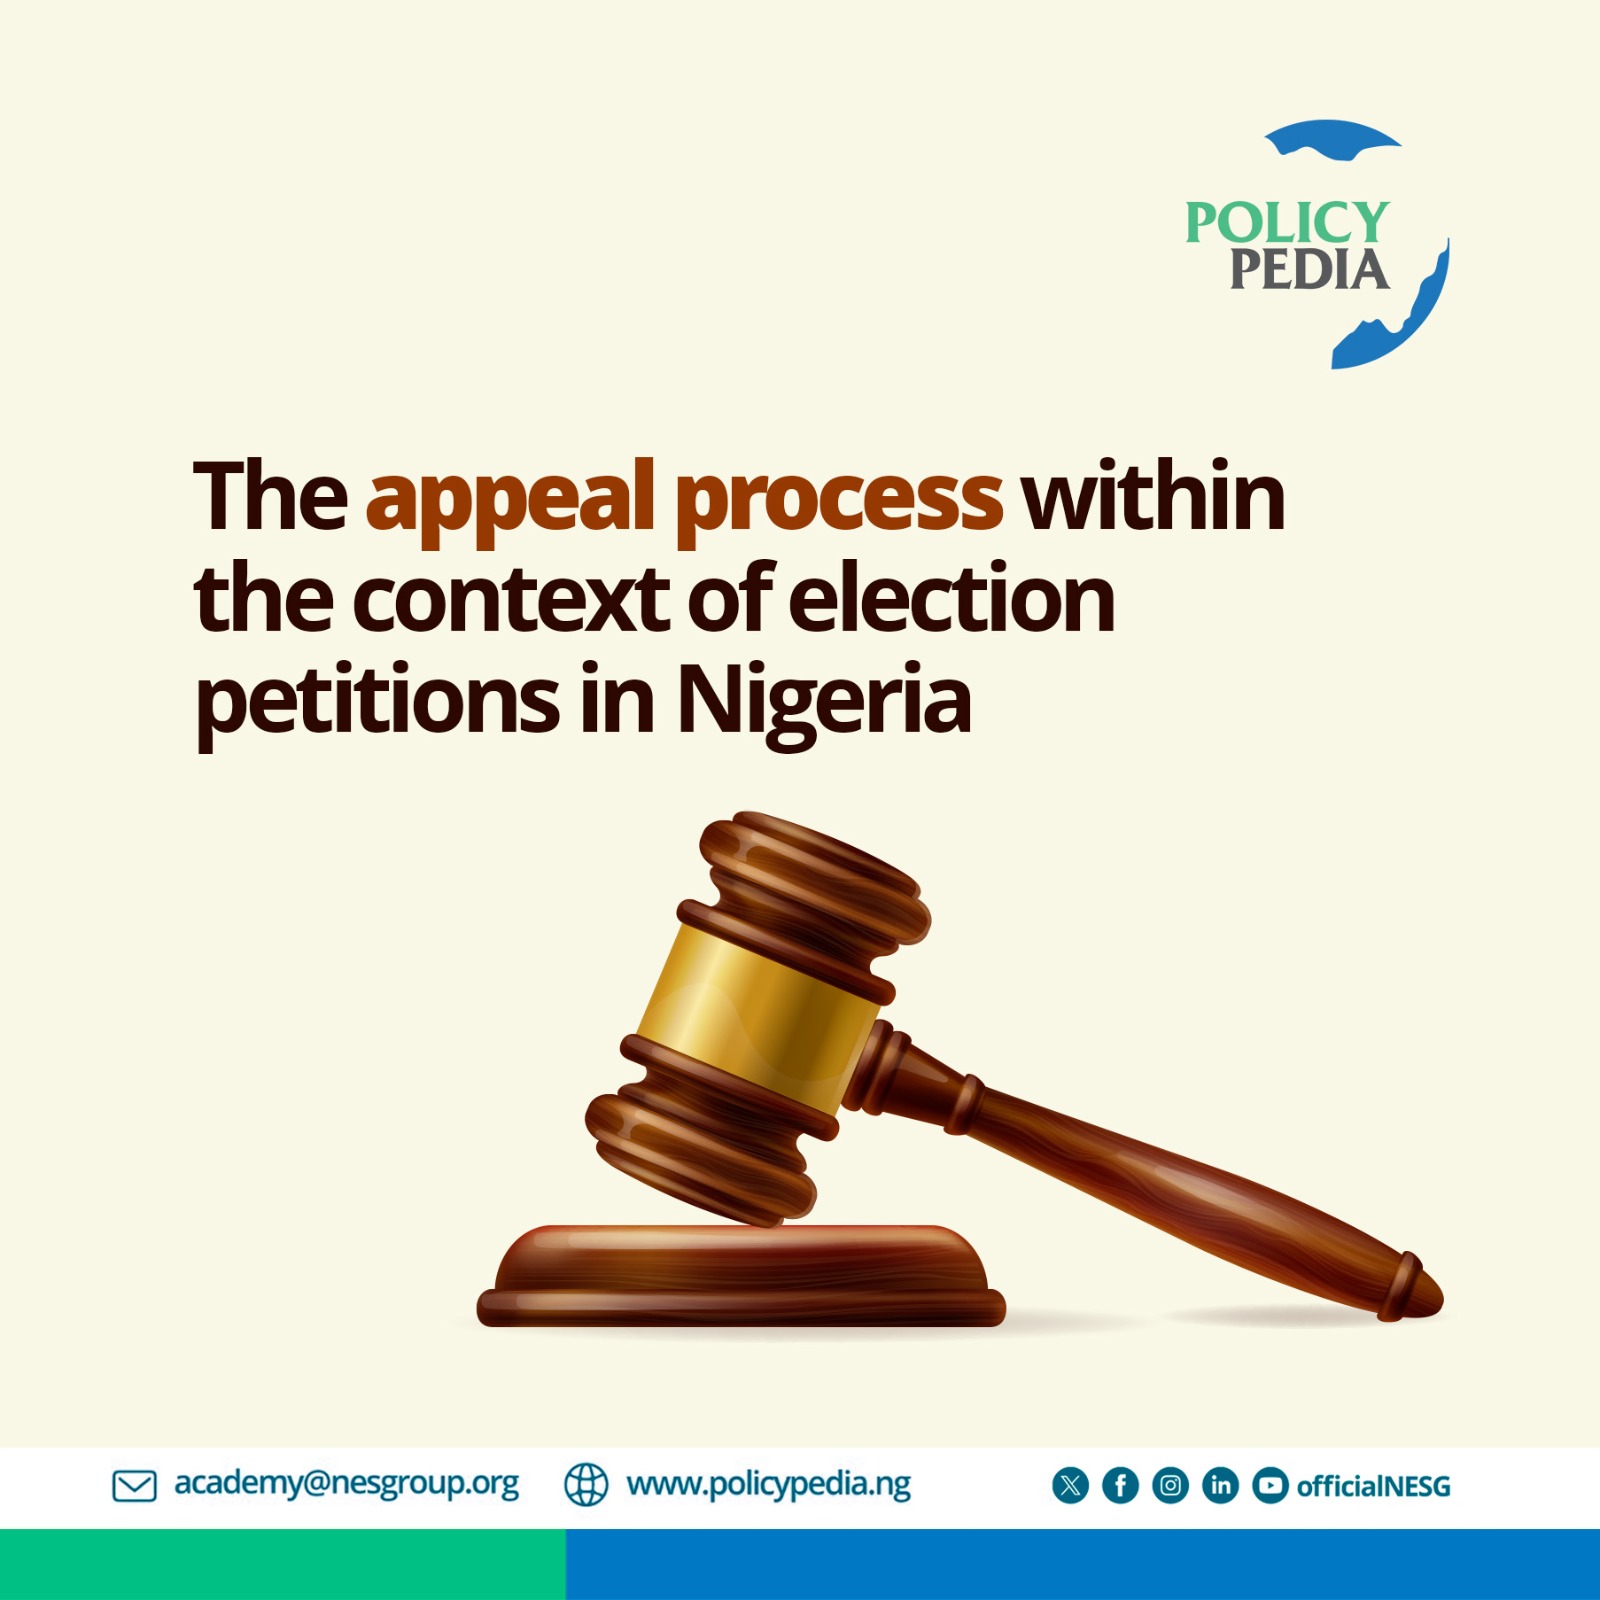 The remedies available and the appeals process within the context of election petitions in Nigeria